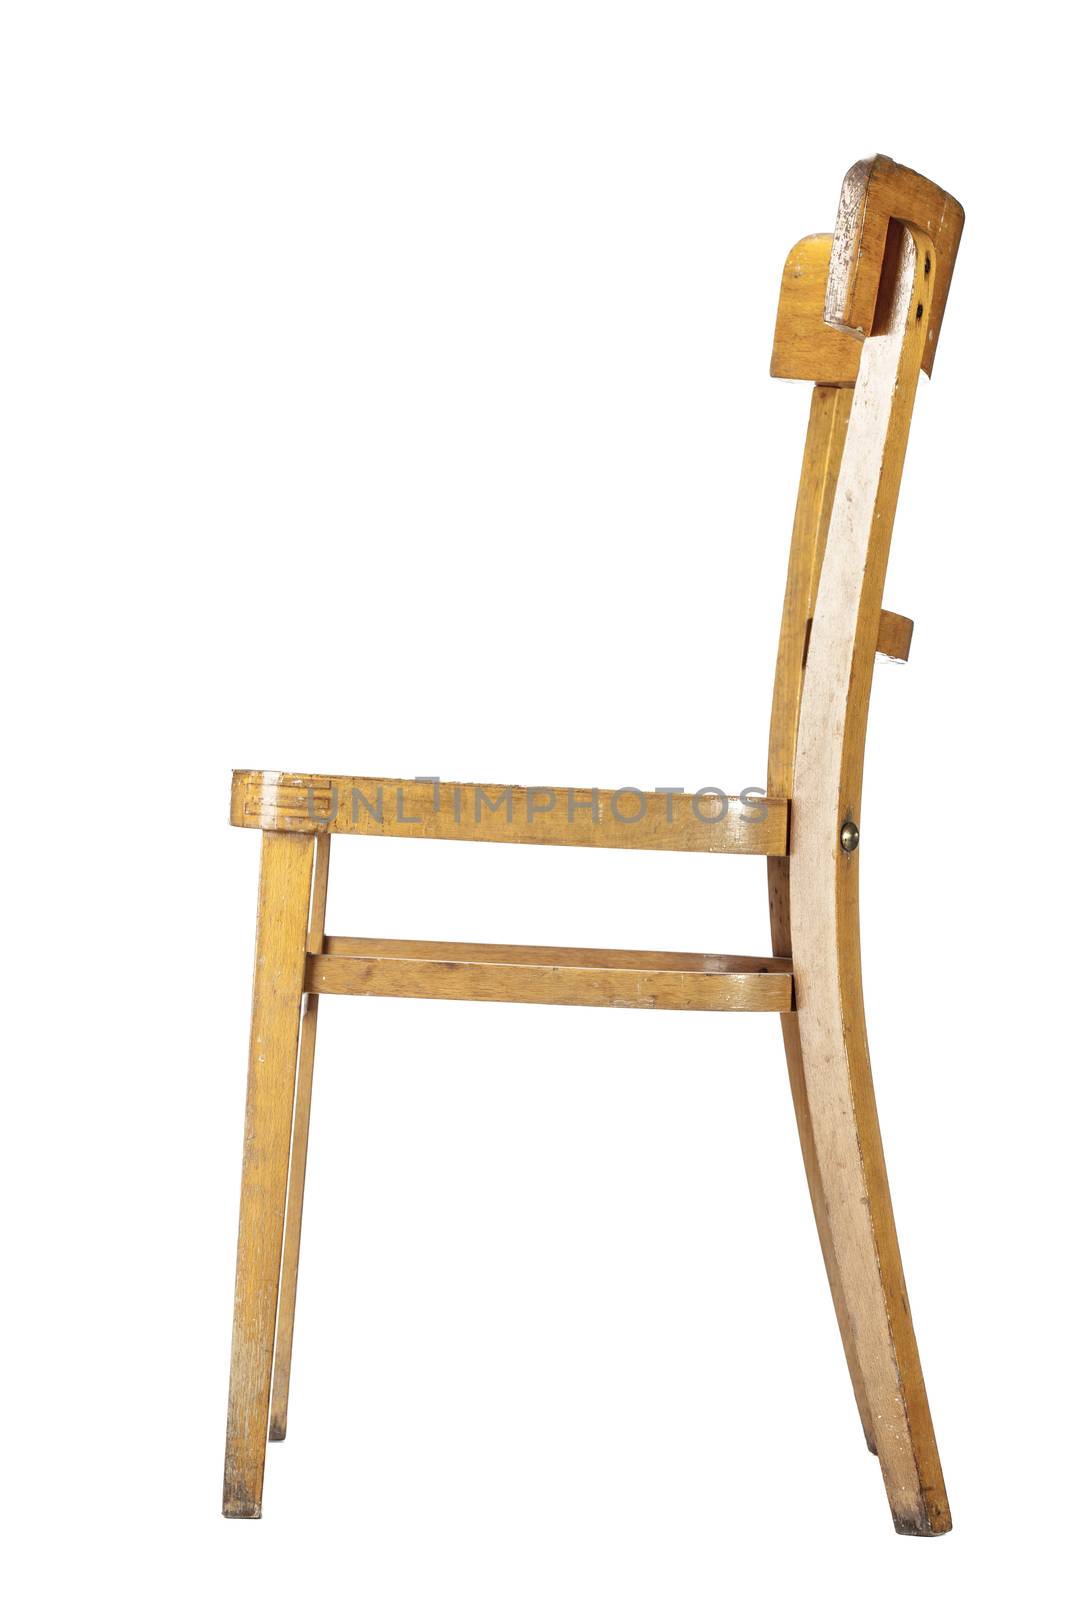 empty old fashioned wooden chair, isolated on white